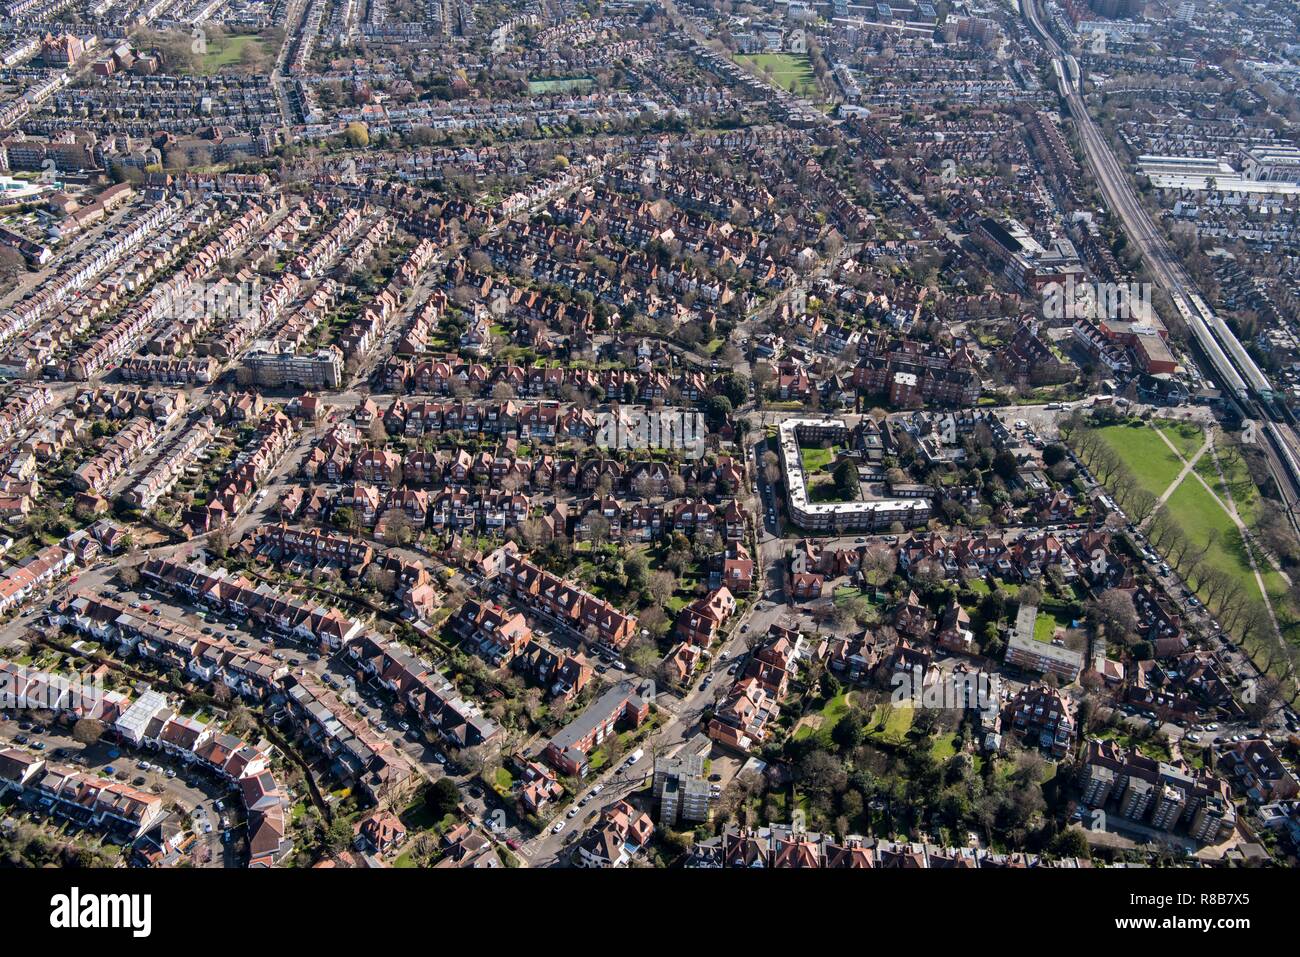 Bedford Park, considered a prototype for later garden suburbs and cities, London, 2018. Creator: Historic England Staff Photographer. Stock Photo